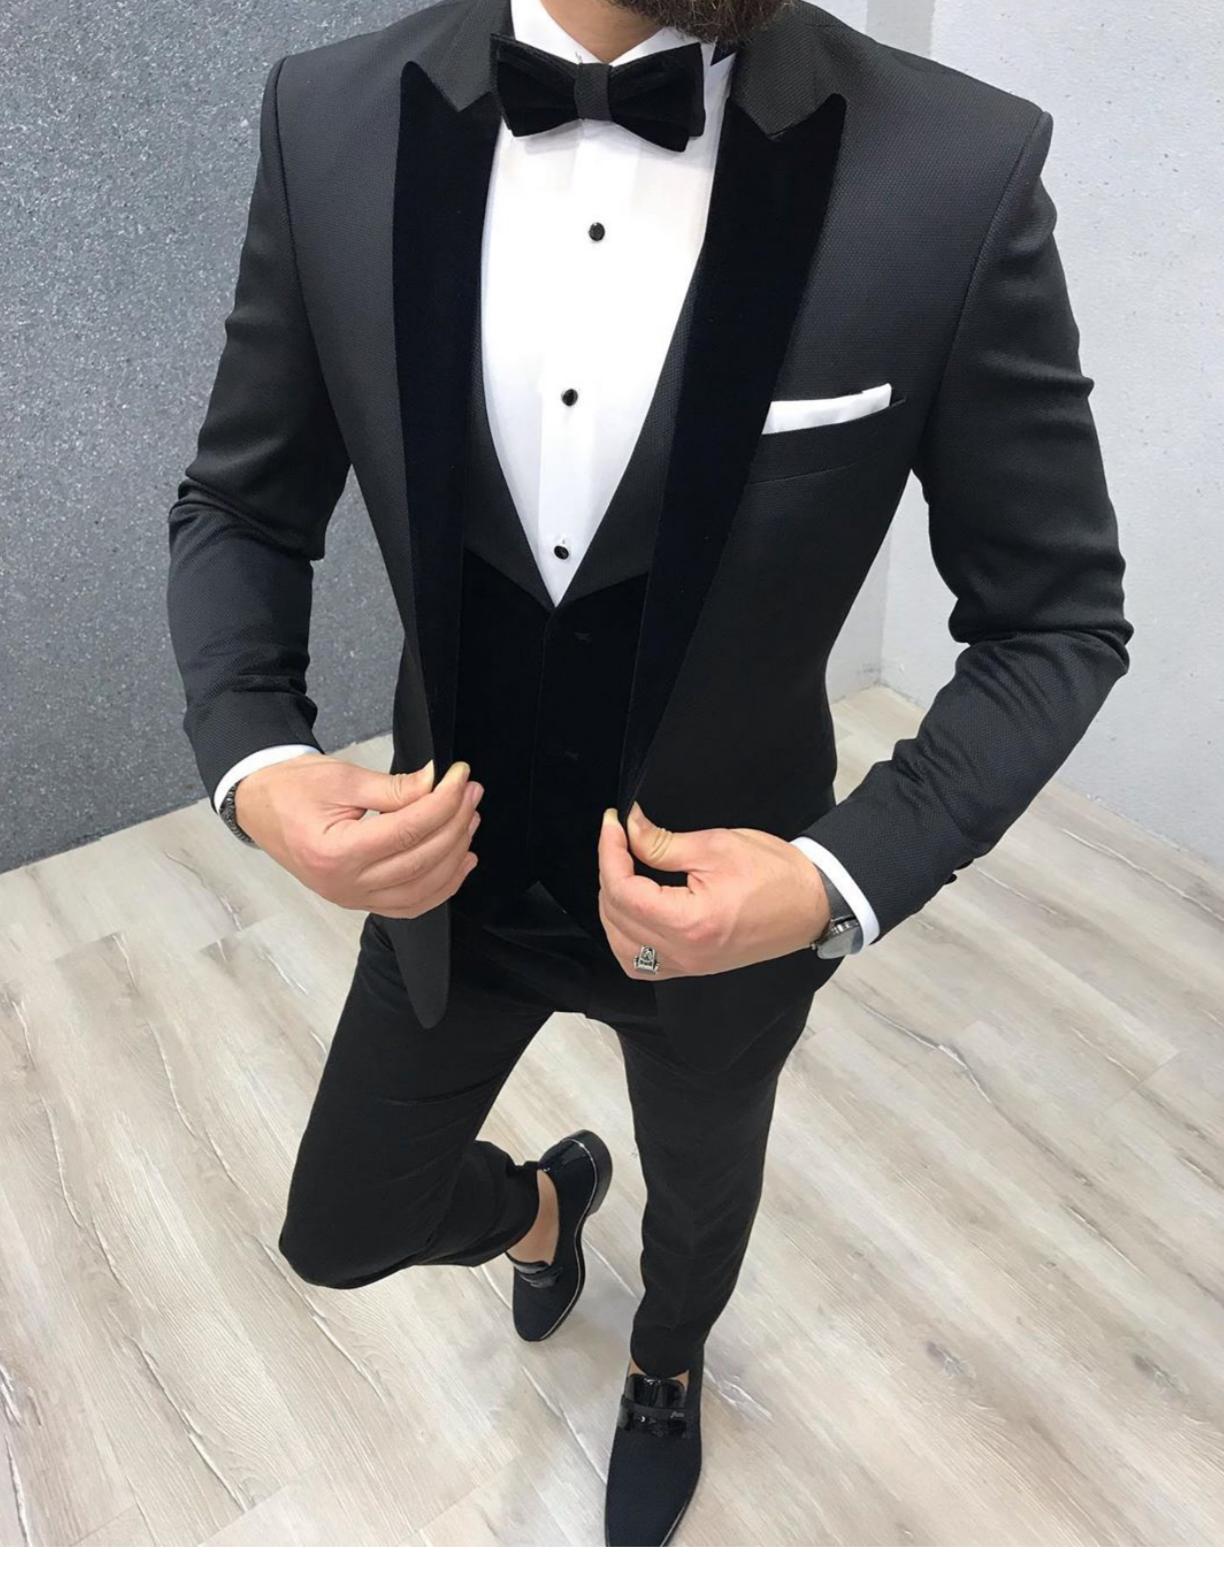 6 Times Groomsmen Rocked a Black Tux by BespokeDaily Blog